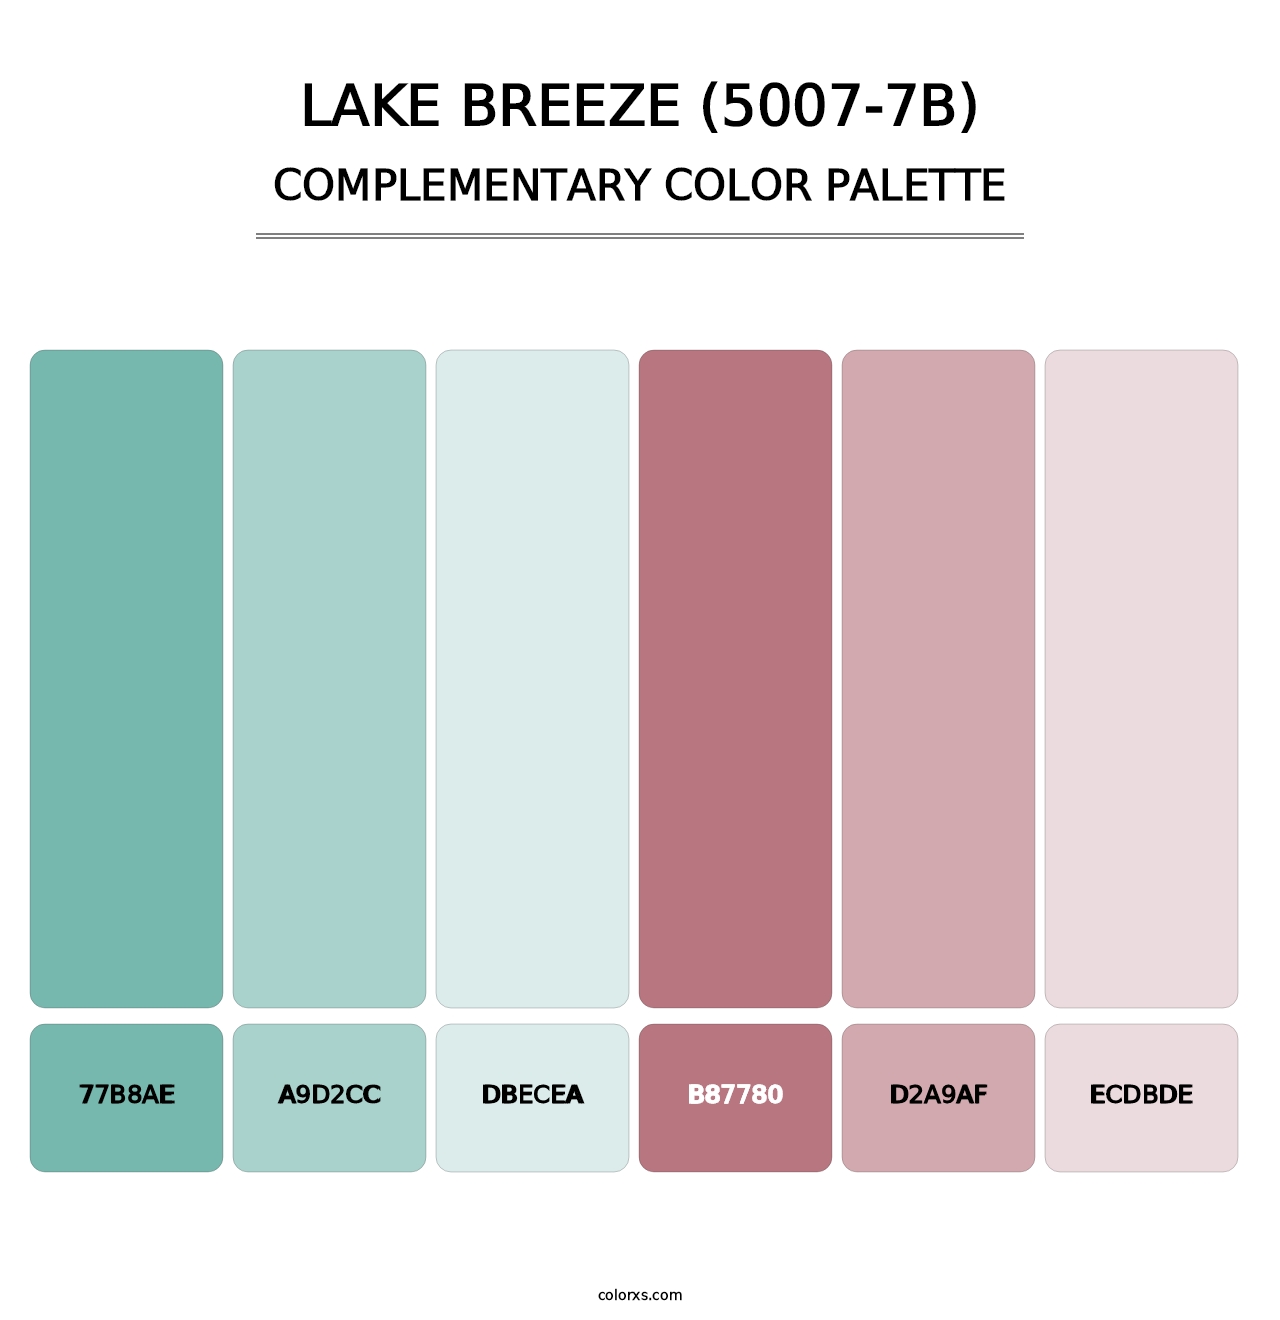 Lake Breeze (5007-7B) - Complementary Color Palette